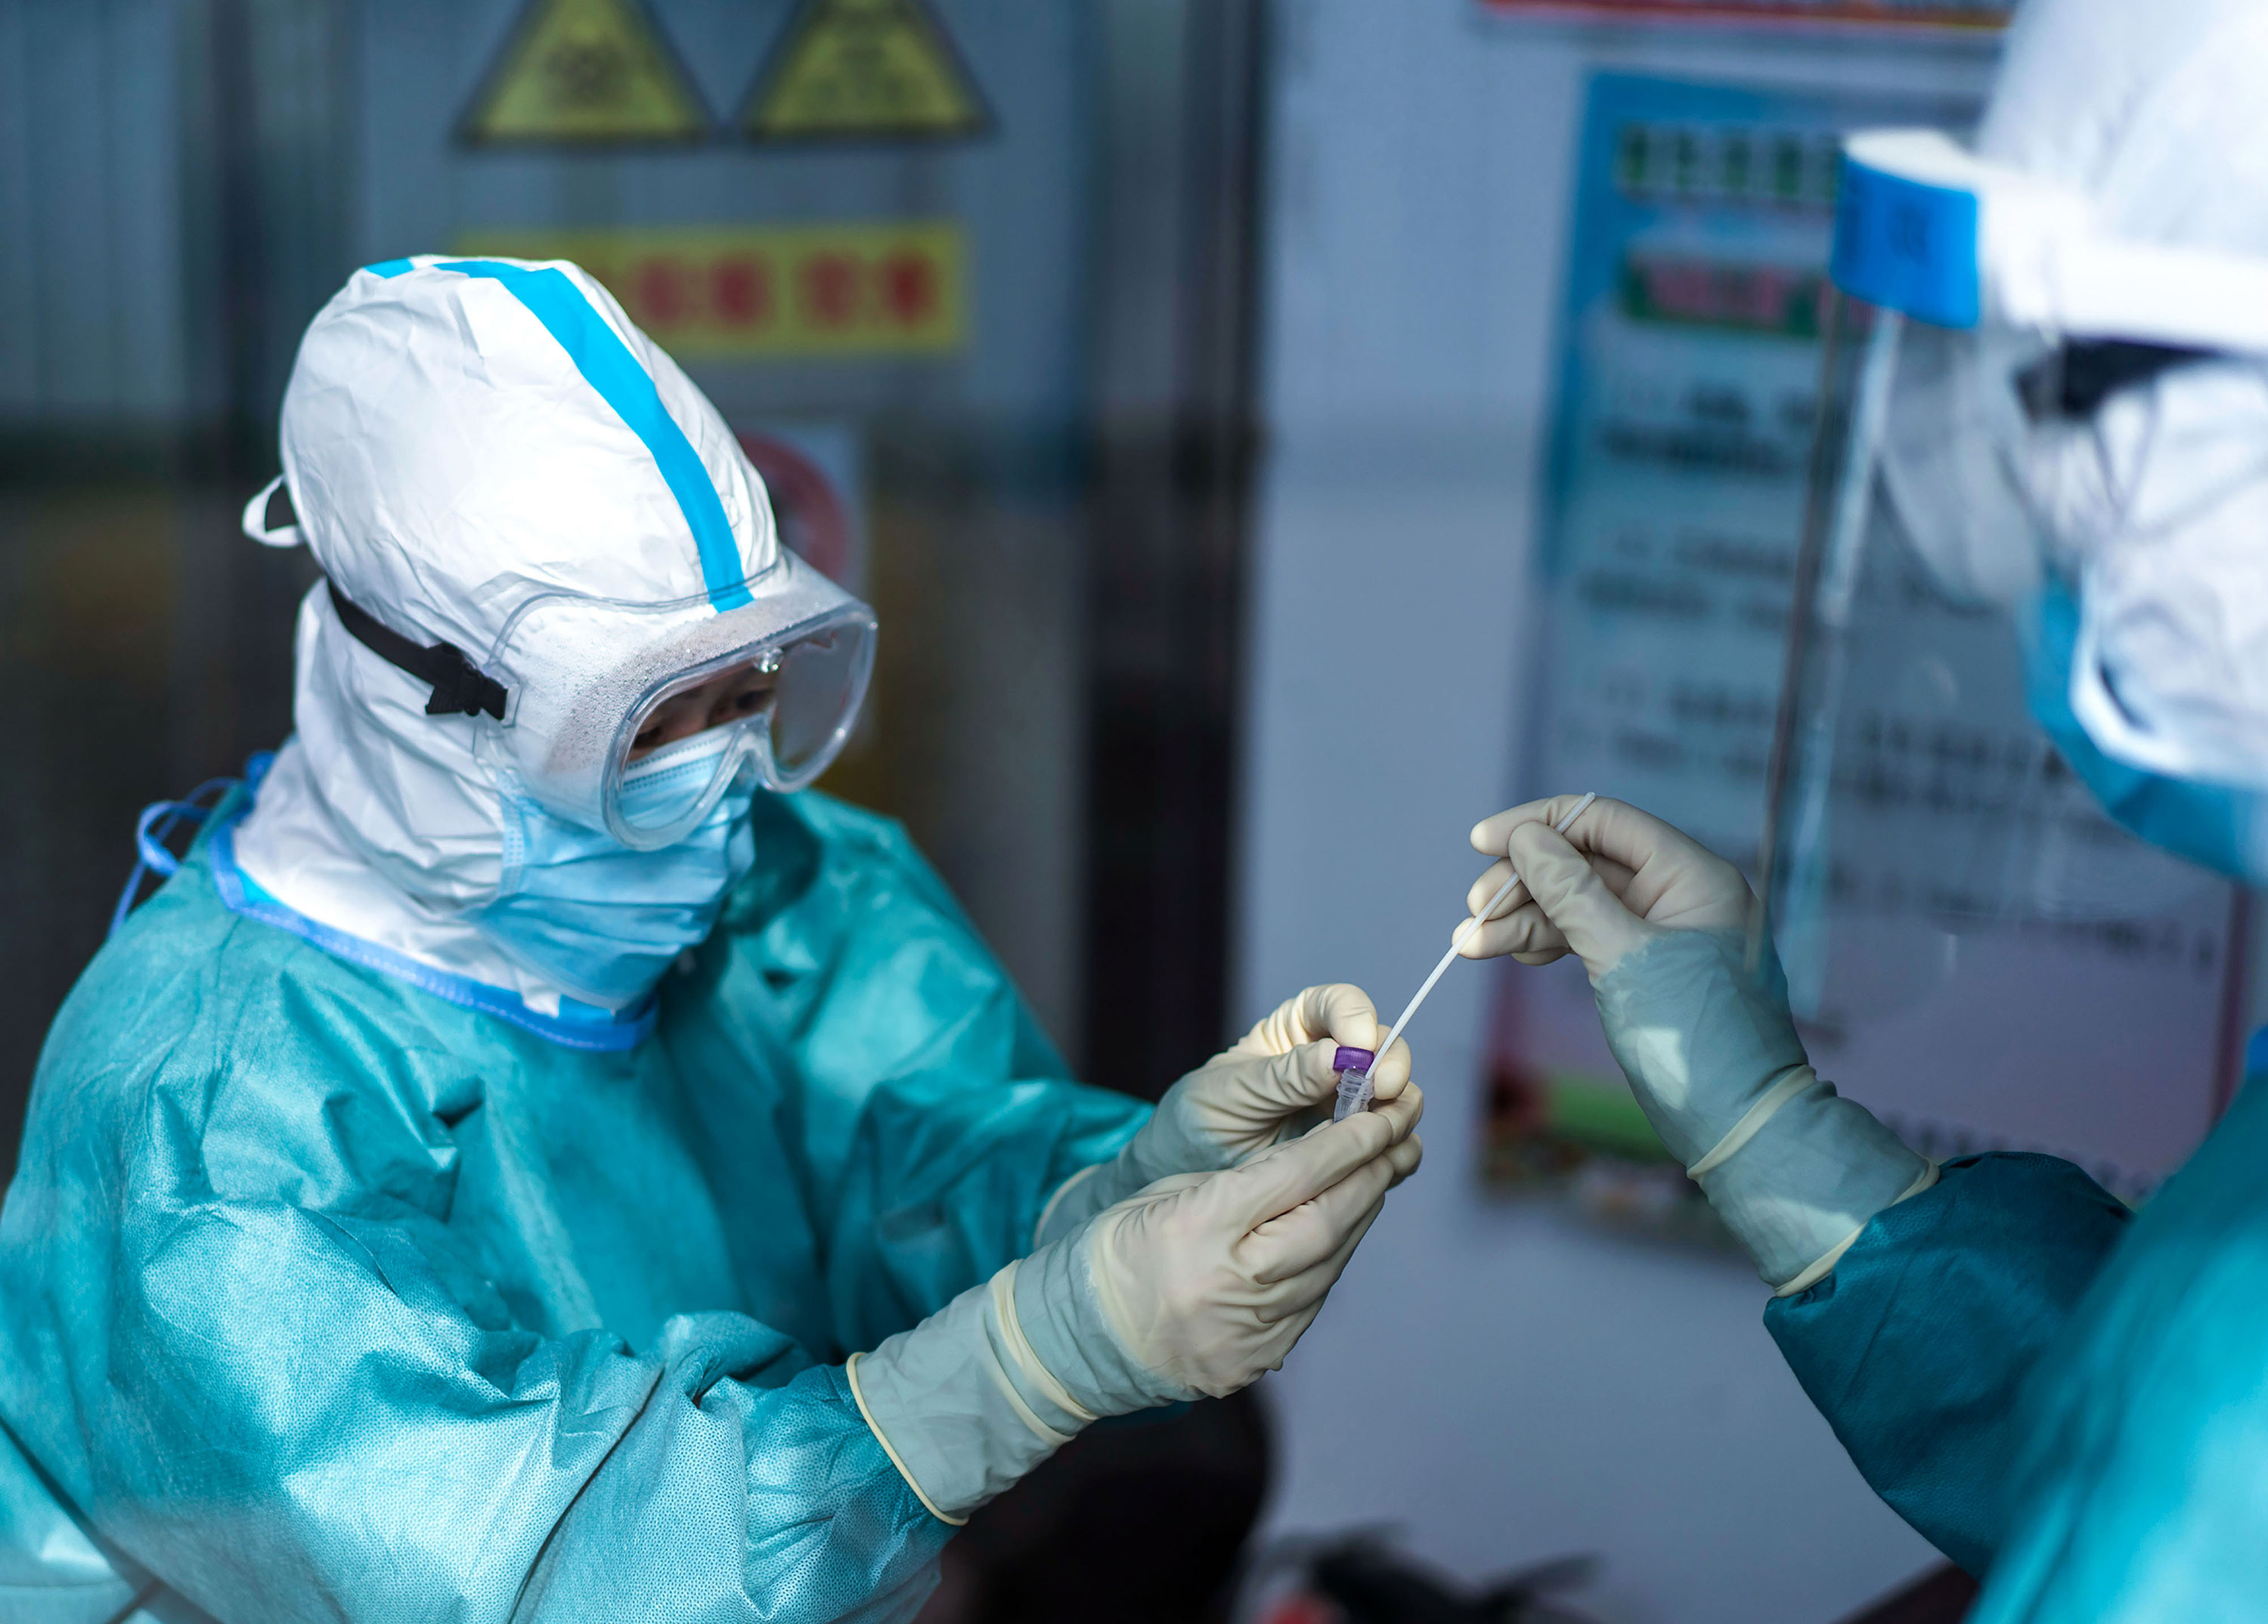 Medical workers take swab samples for a coronavirus test at a health services center in Suifenhe, China on April 24.